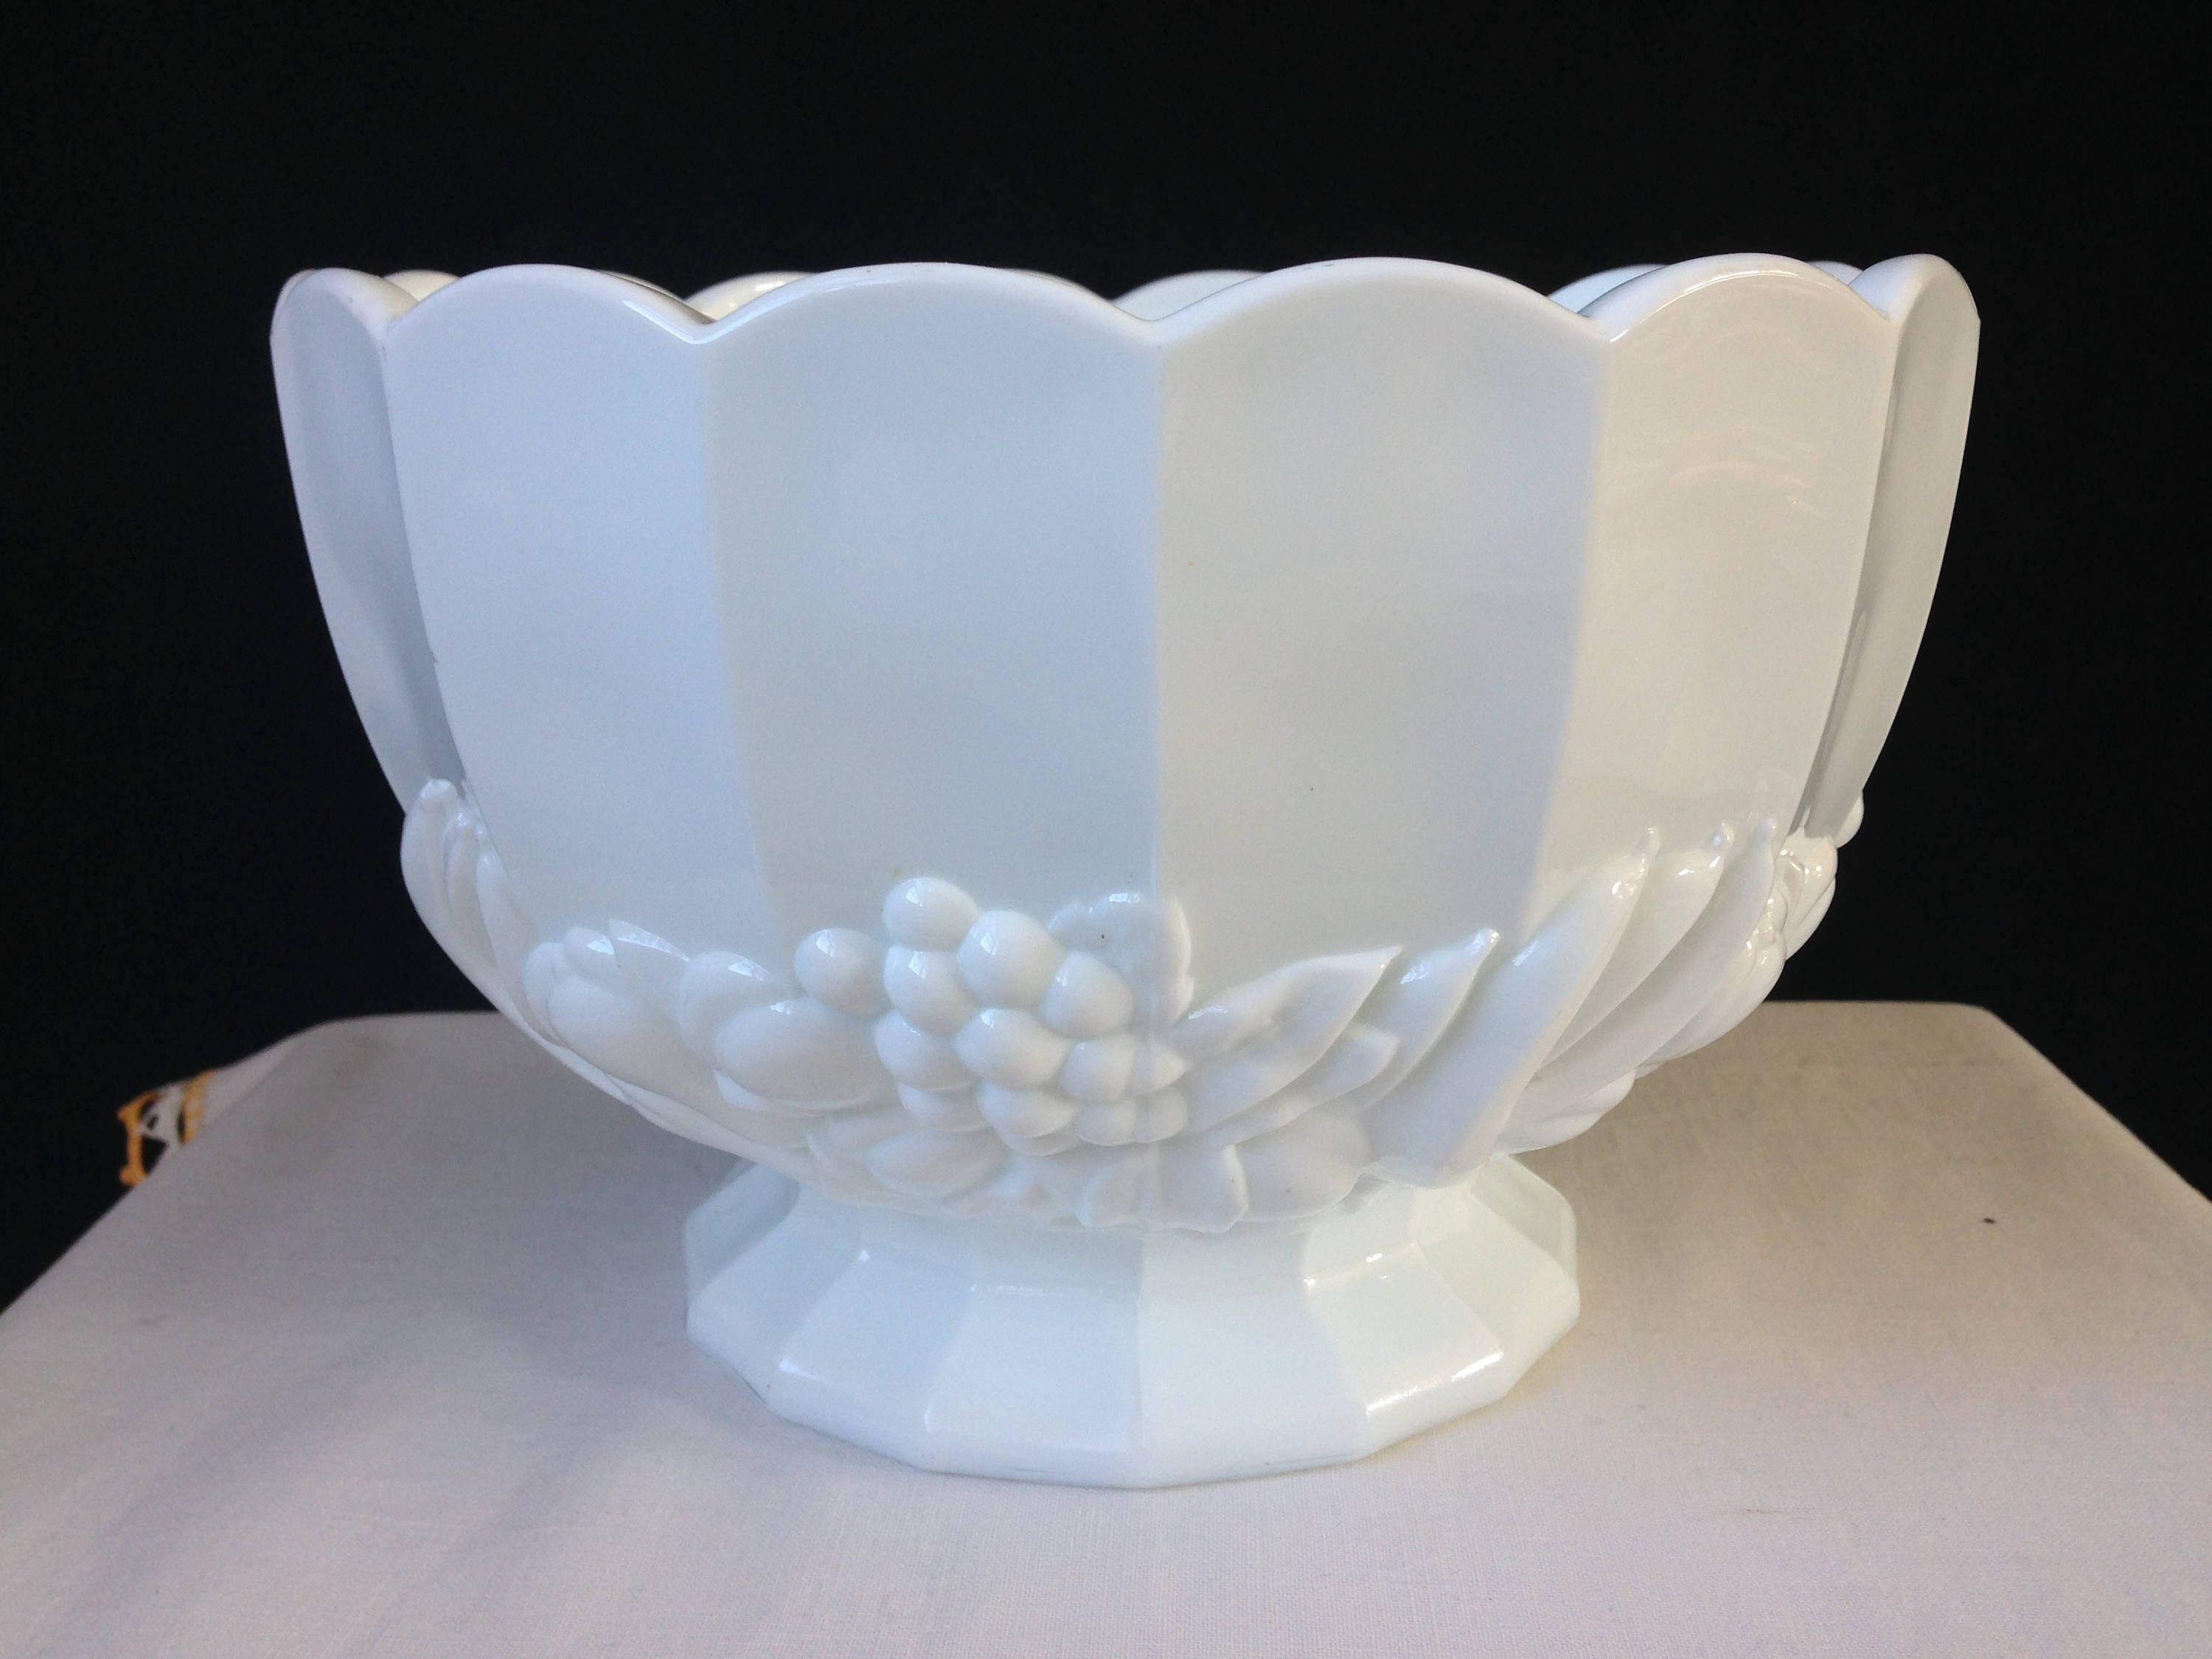 22 Awesome Glass Pedestal Bowl Vase 2023 free download glass pedestal bowl vase of indiana glass della robbia banana fruits milk glass footed inside indiana glass della robbia banana fruits milk glass footed bowl scalloped rim